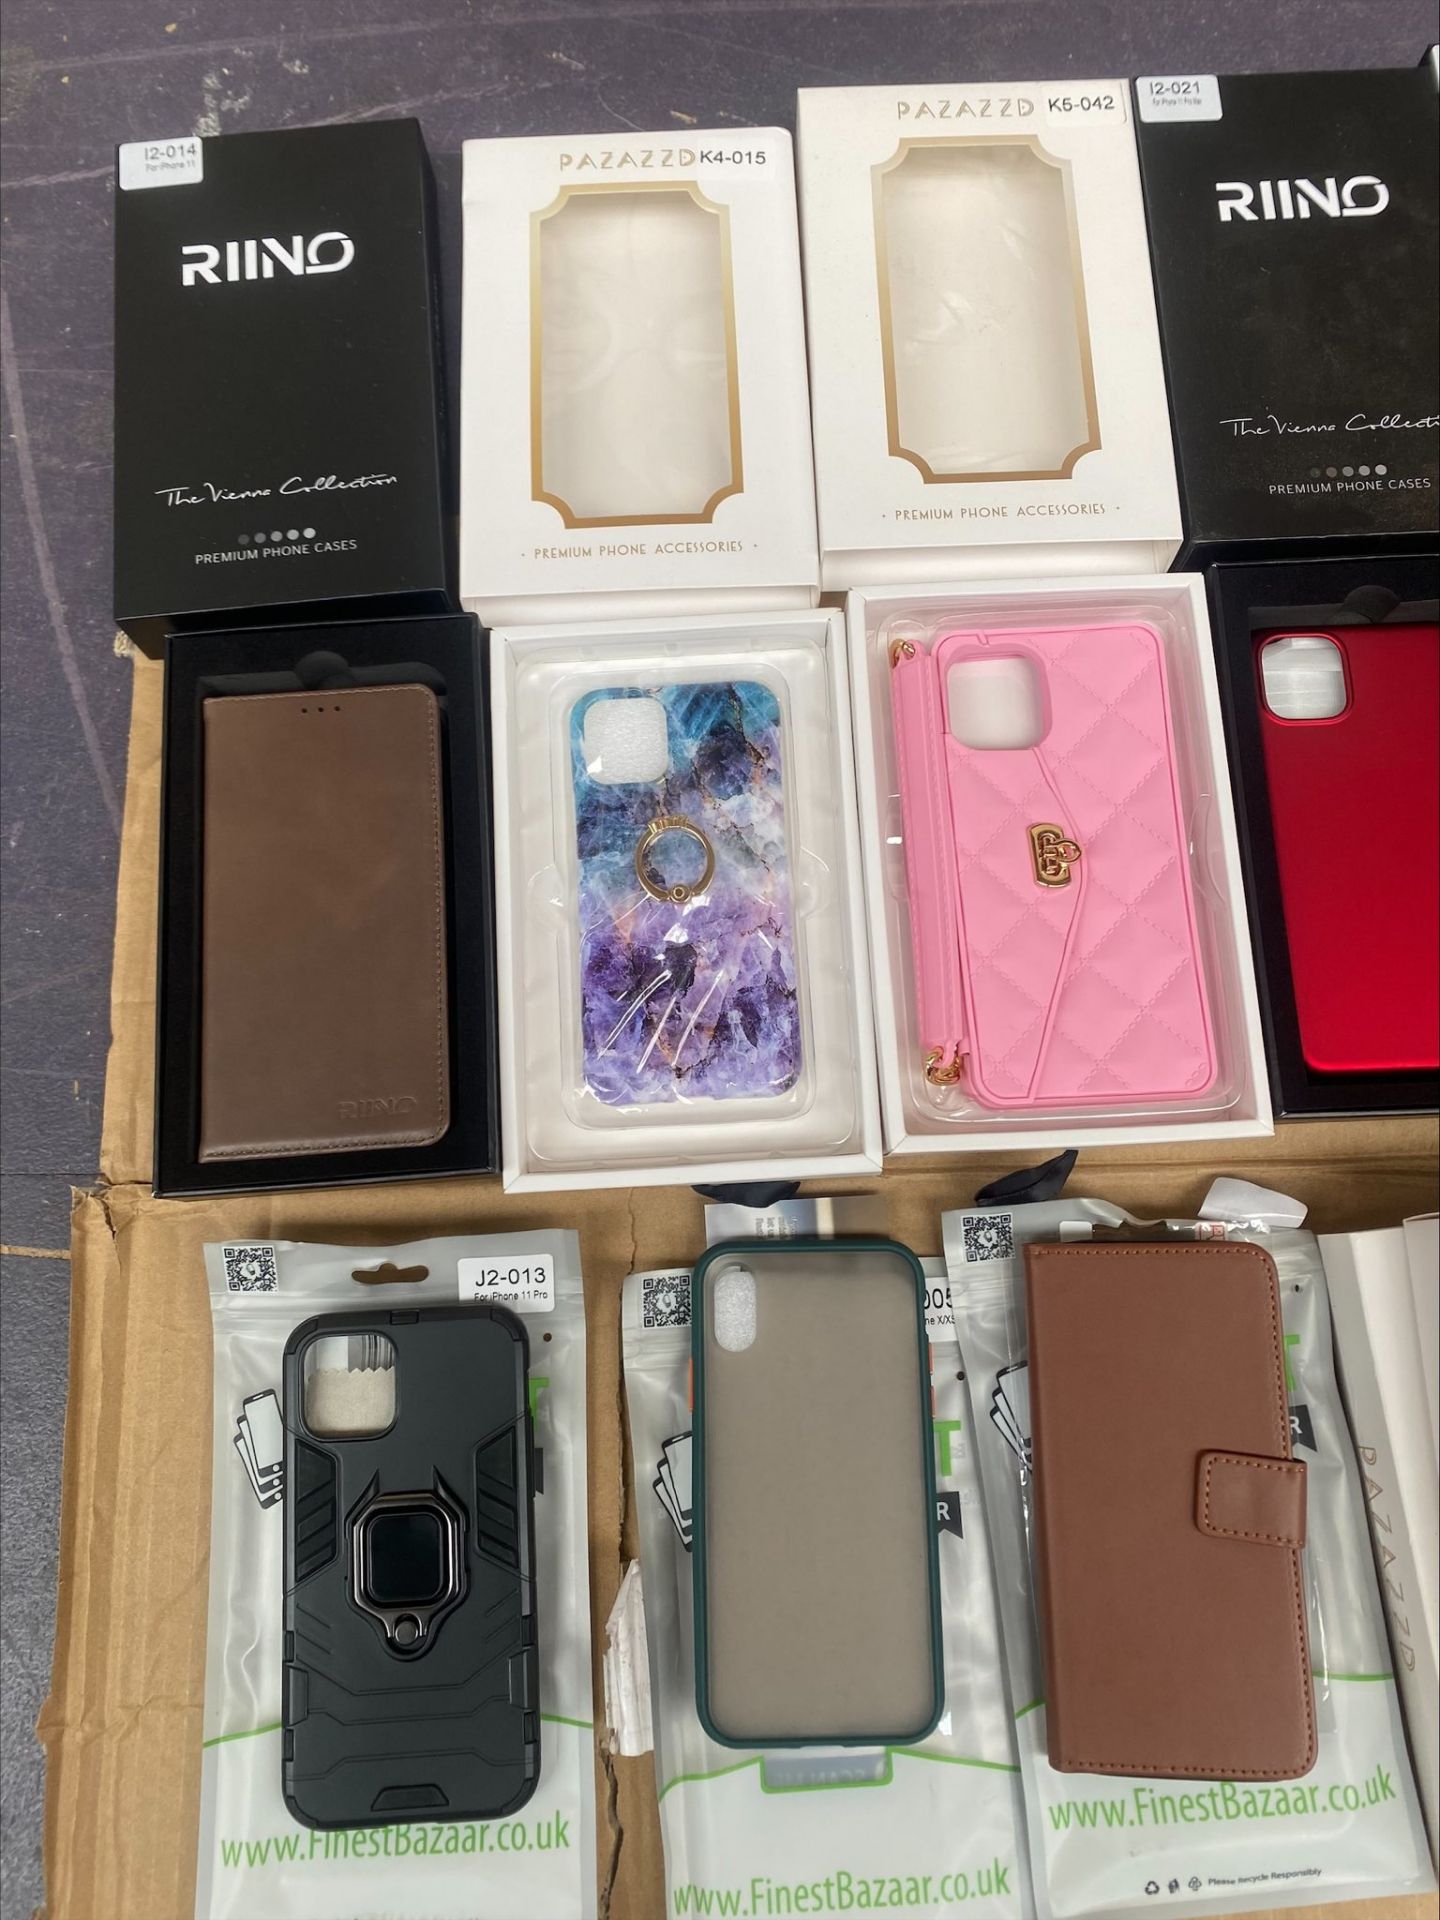 Joblot 5K Units iPhone, Samsung, Airpod, Apple Watch, Charging Cables, Phone Covers Accessories - Image 15 of 20